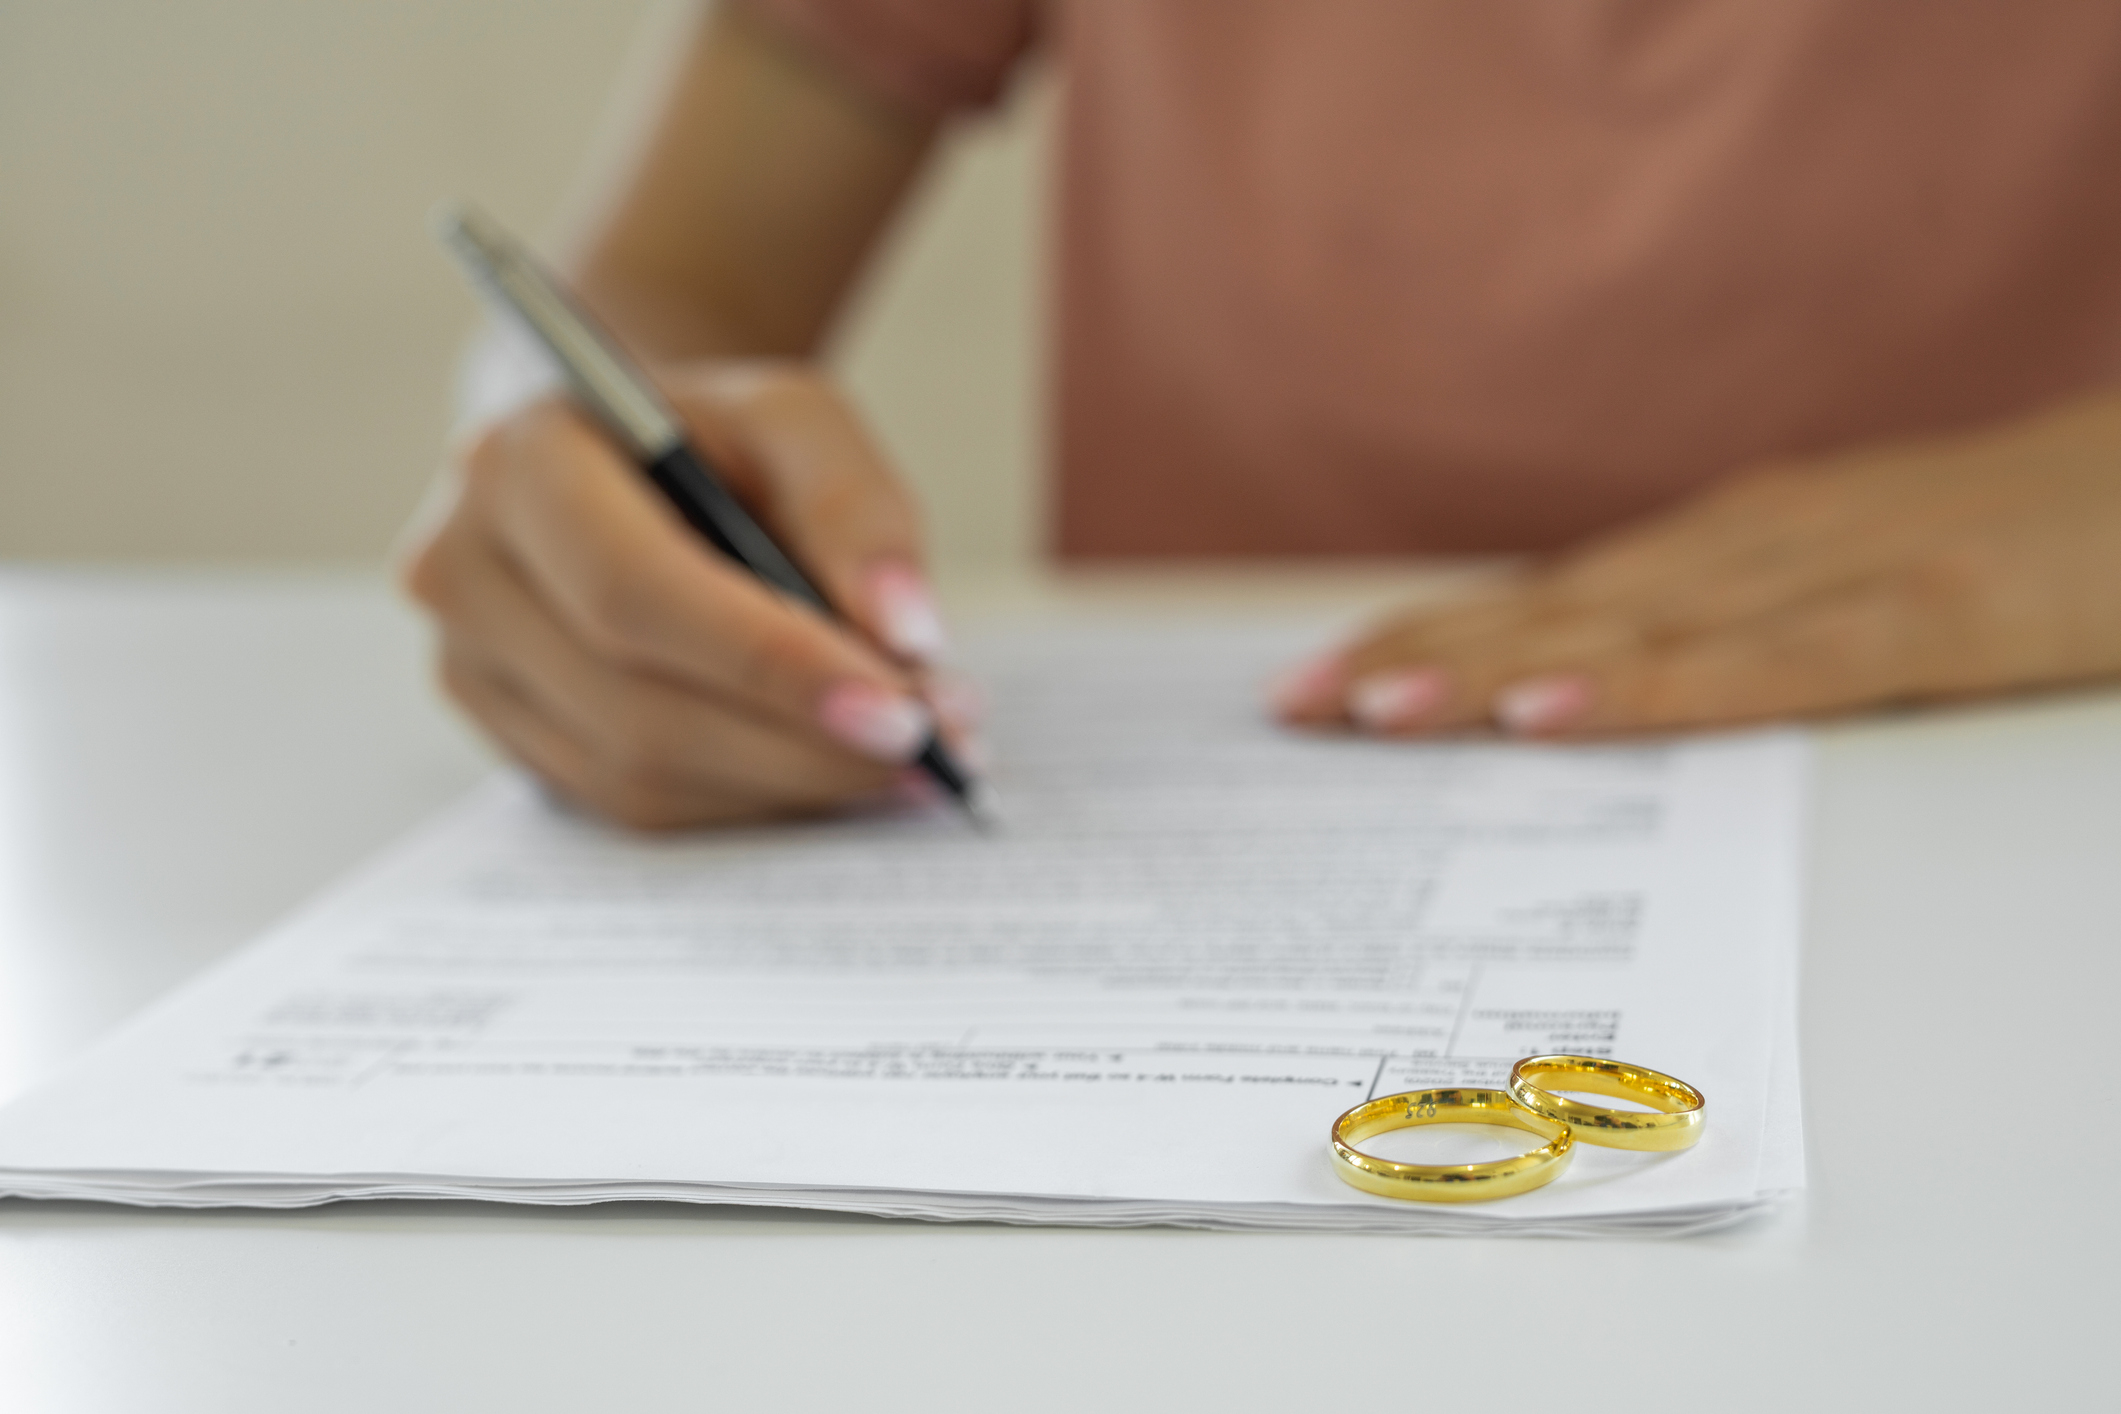 Person signing document beside two wedding rings, implying a theme of marriage commitment or legal aspects of relationships